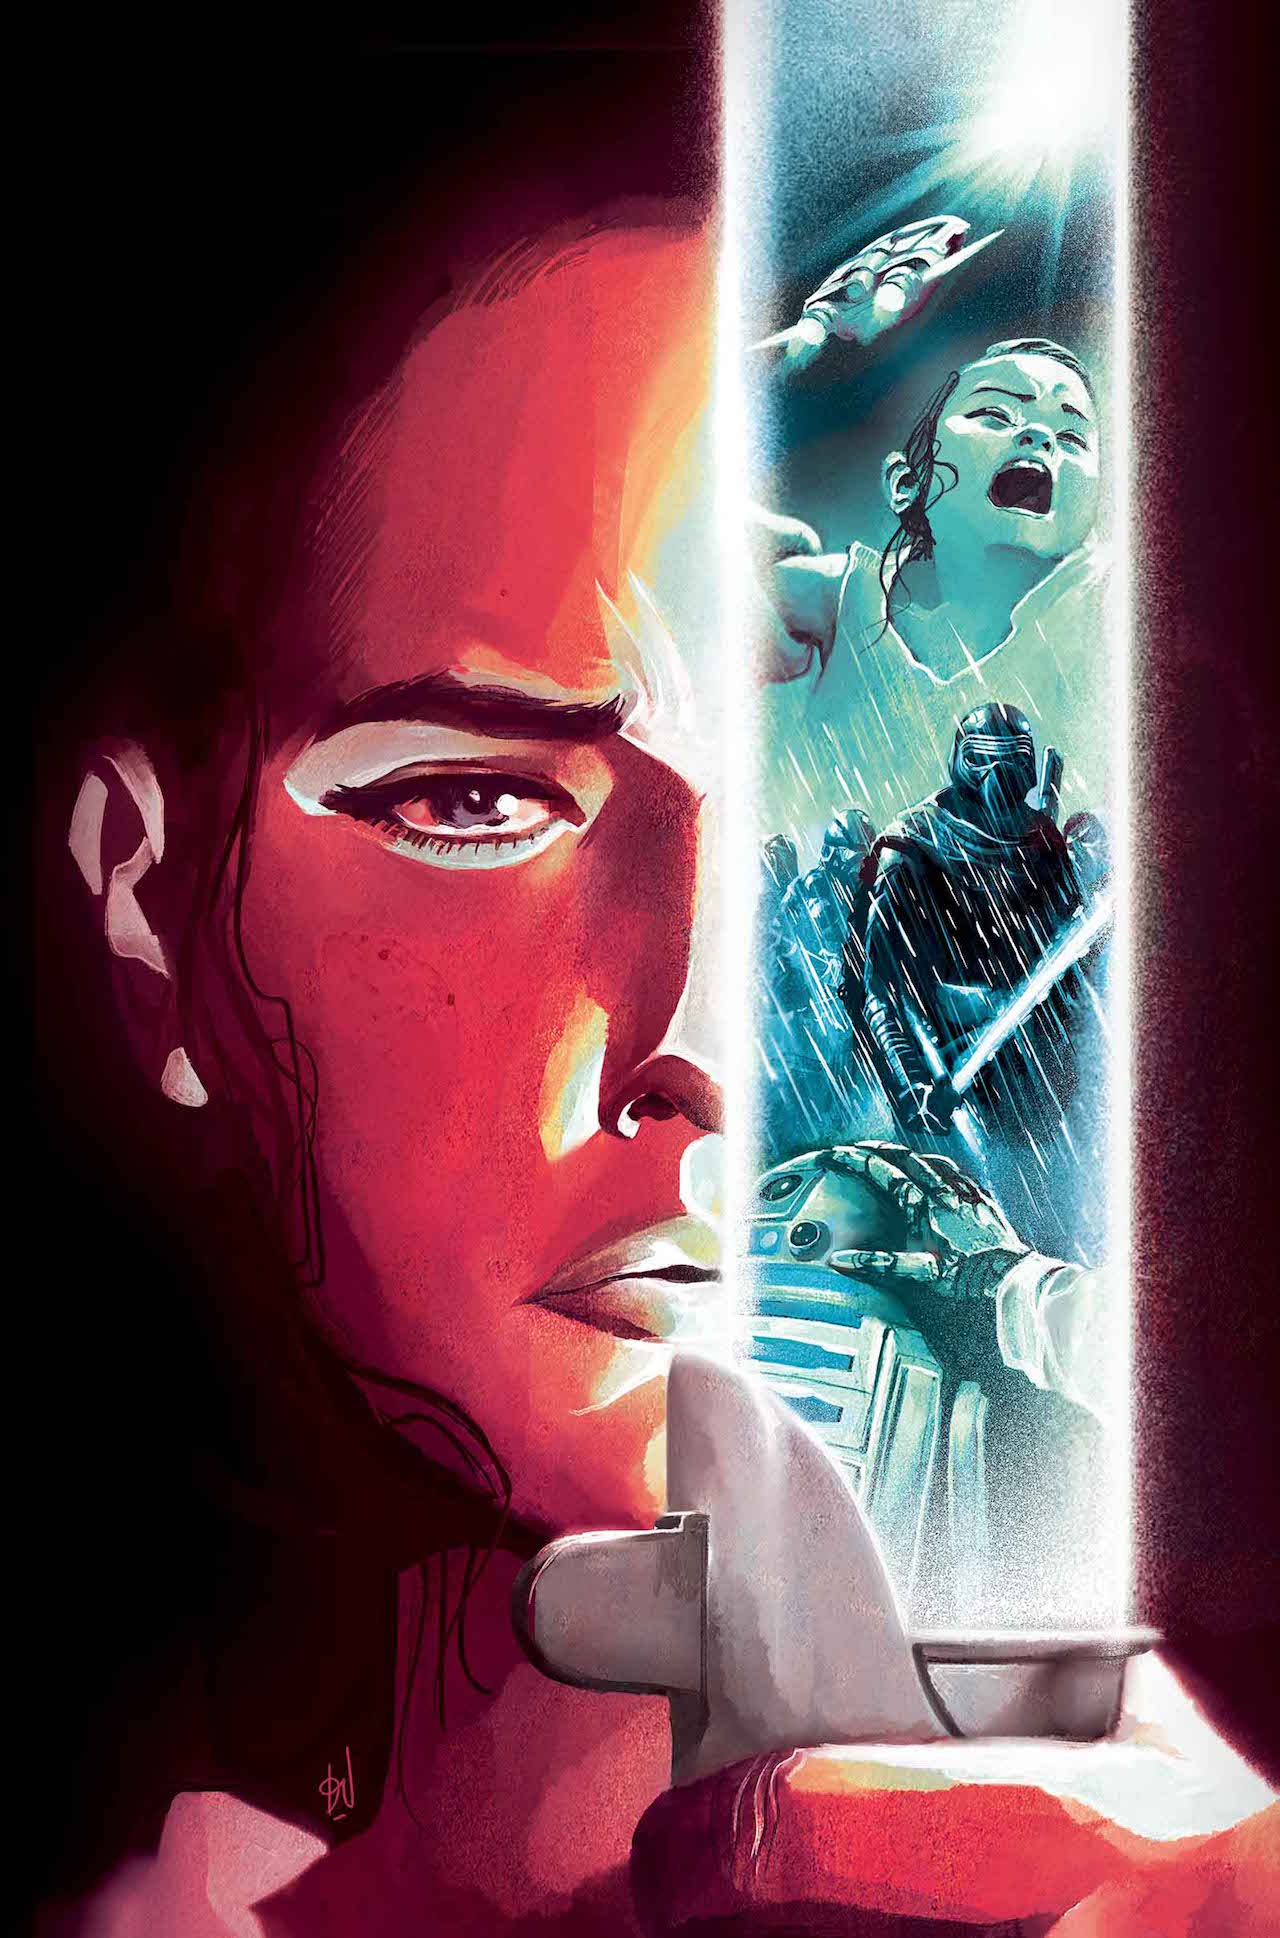 STAR WARS: THE FORCE AWAKENS ADAPTATION #4 (of 6)